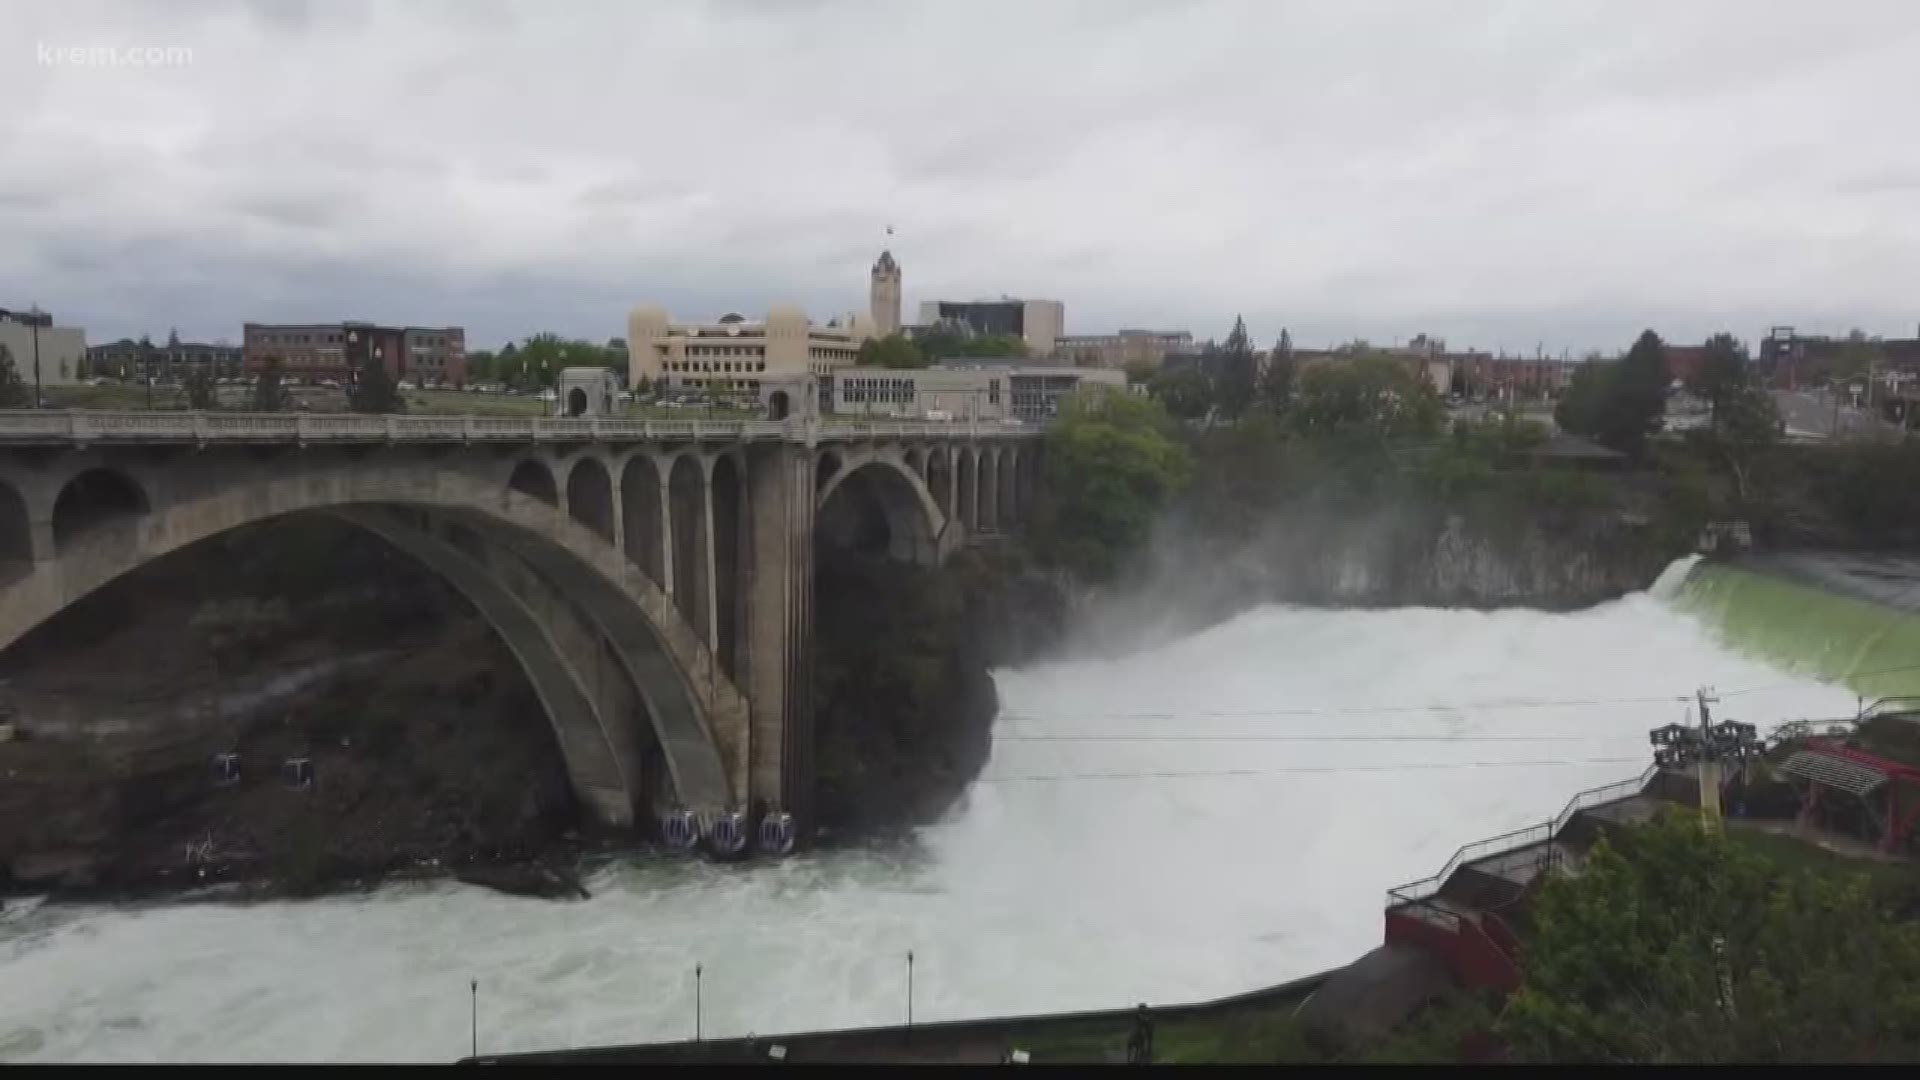 Construction has been completed on a plaza near the Spokane Falls after construction delays.